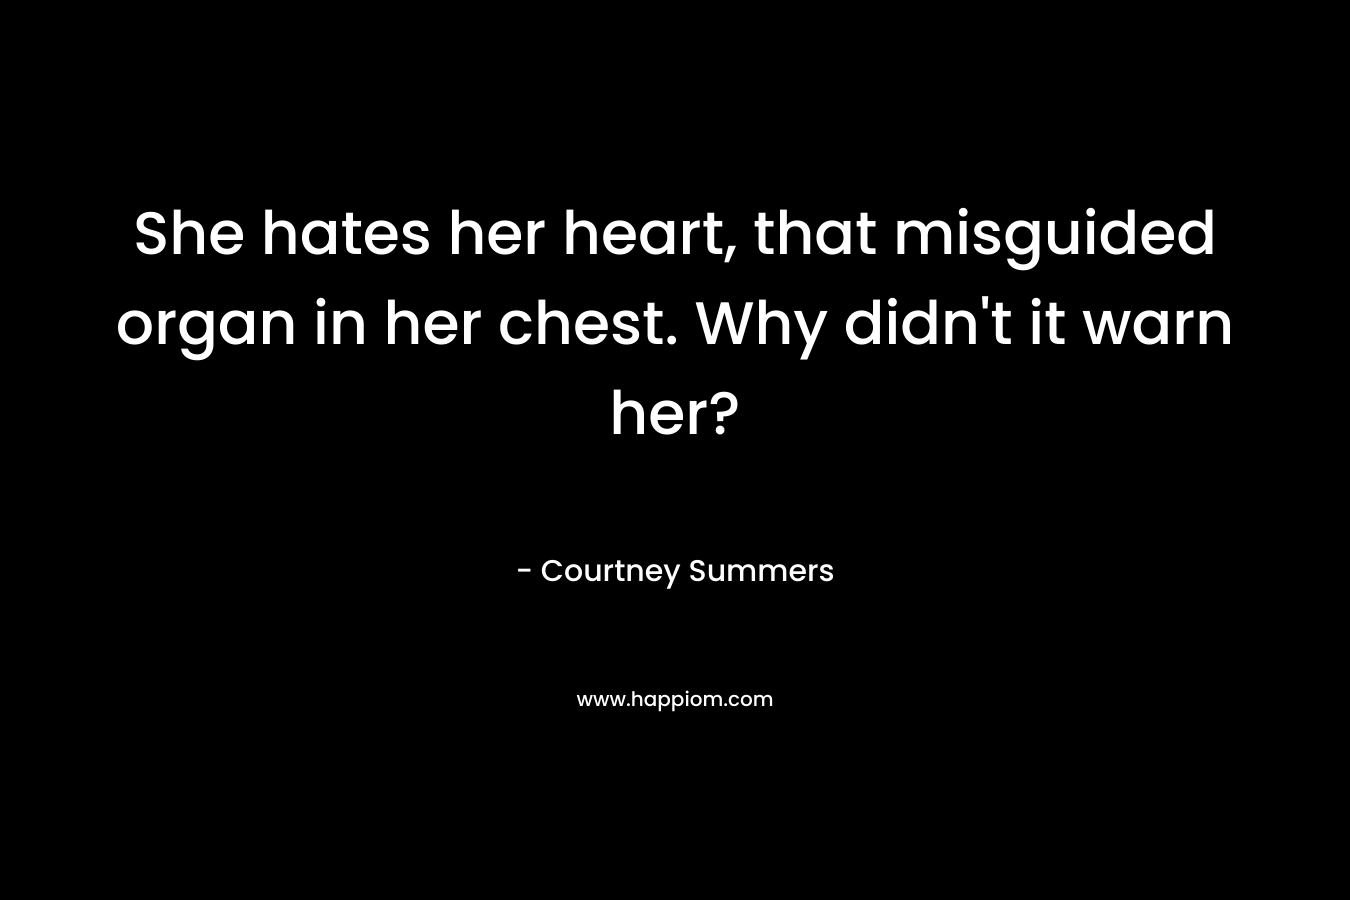 She hates her heart, that misguided organ in her chest. Why didn’t it warn her? – Courtney Summers